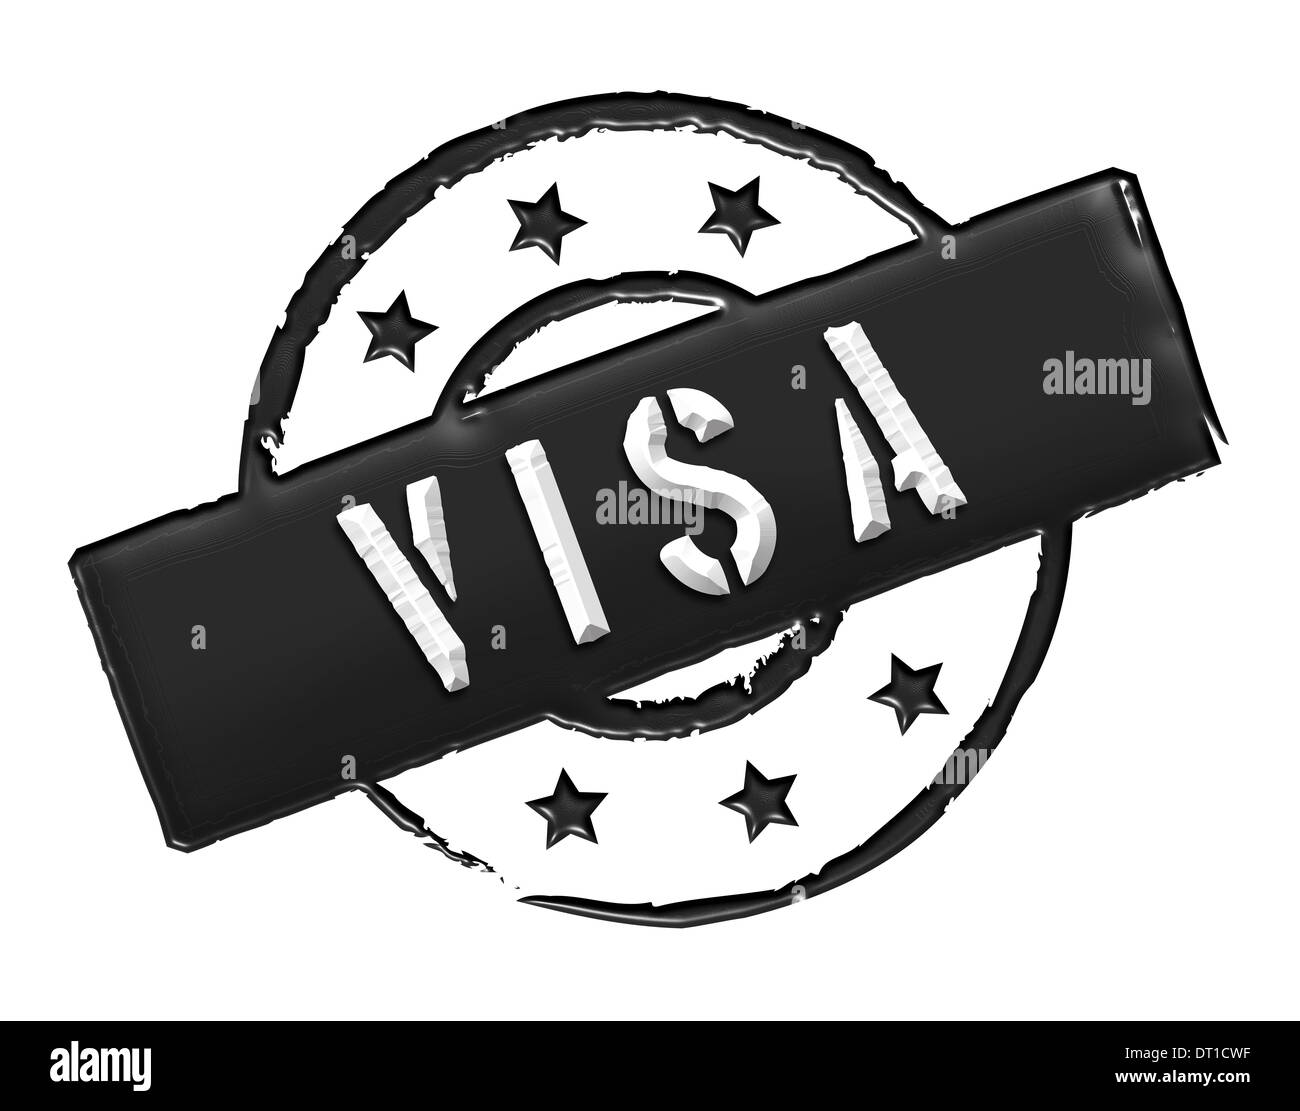 Visa Black and White Stock Photos & Images - Alamy